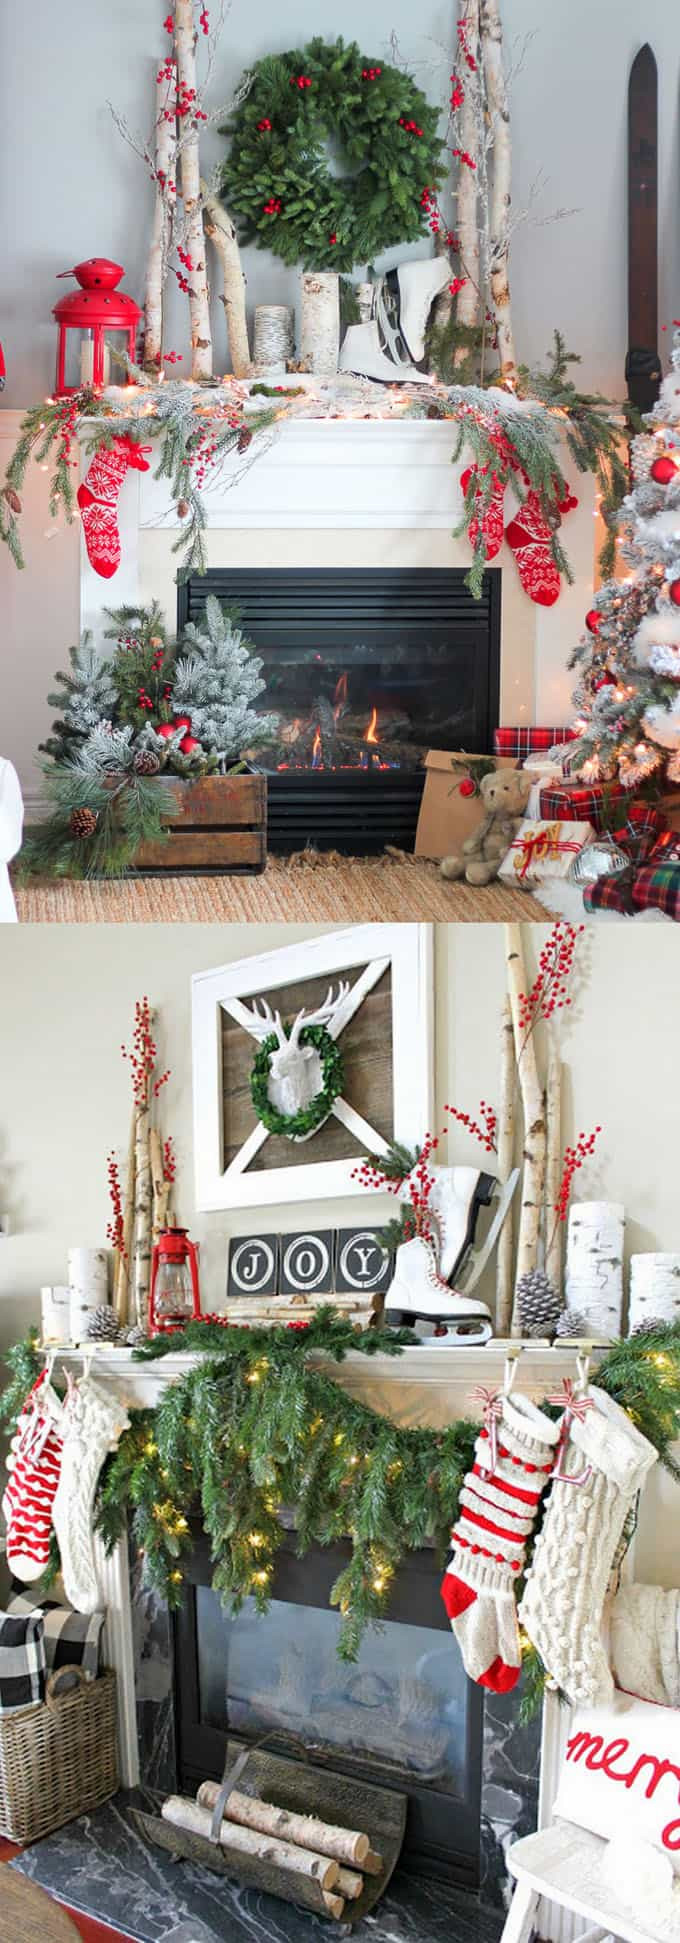 Christmas Apartment Decor
 100 Favorite Christmas Decorating Ideas For Every Room in